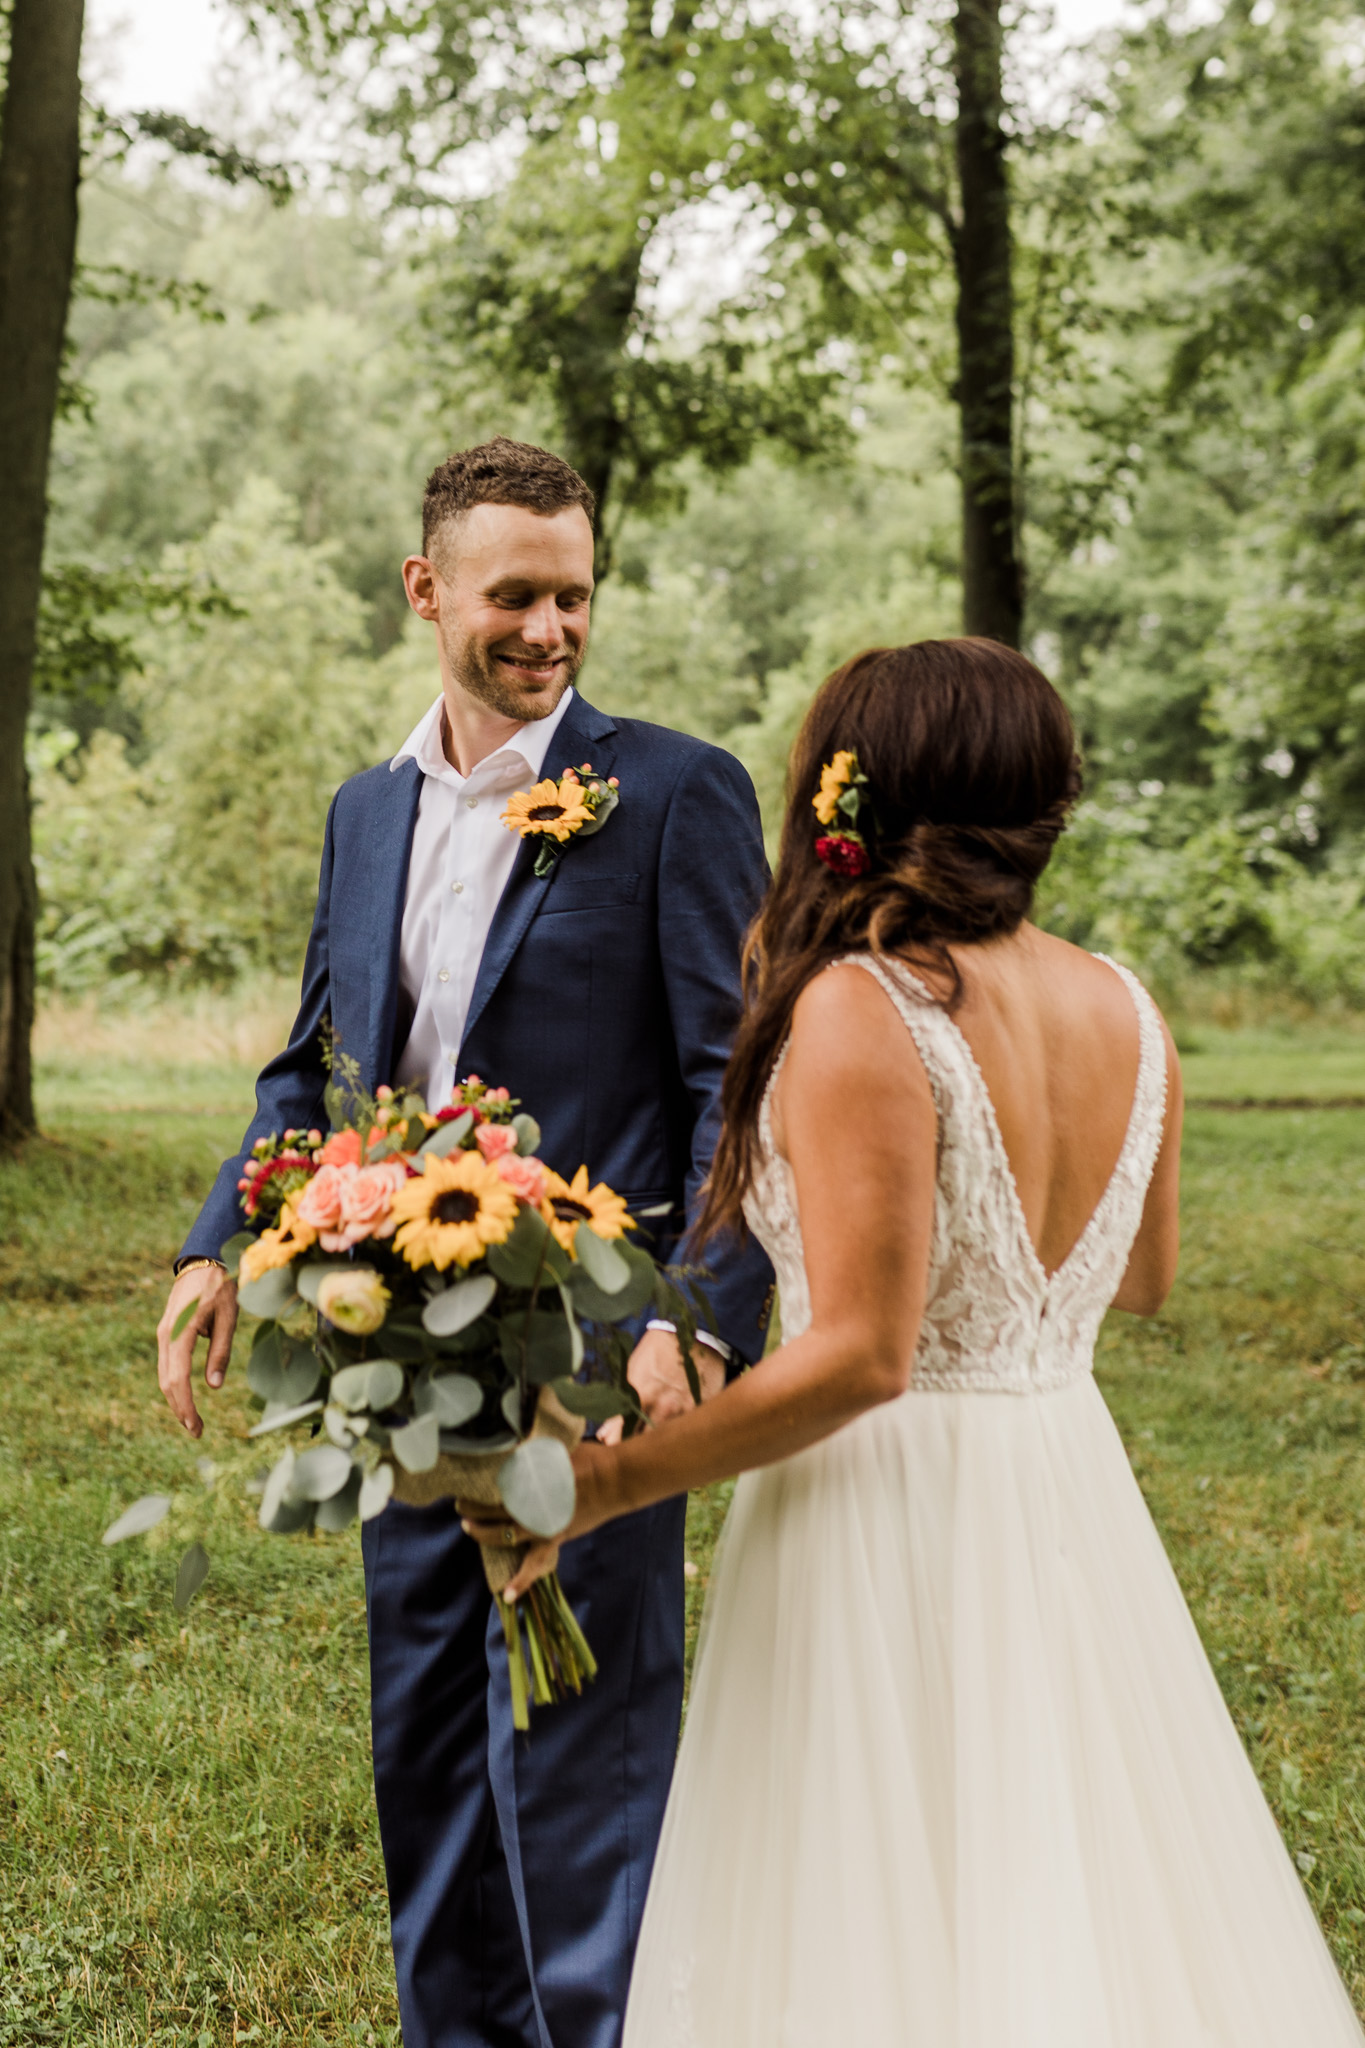 Elopement Activities for a Unique Experience - First Look